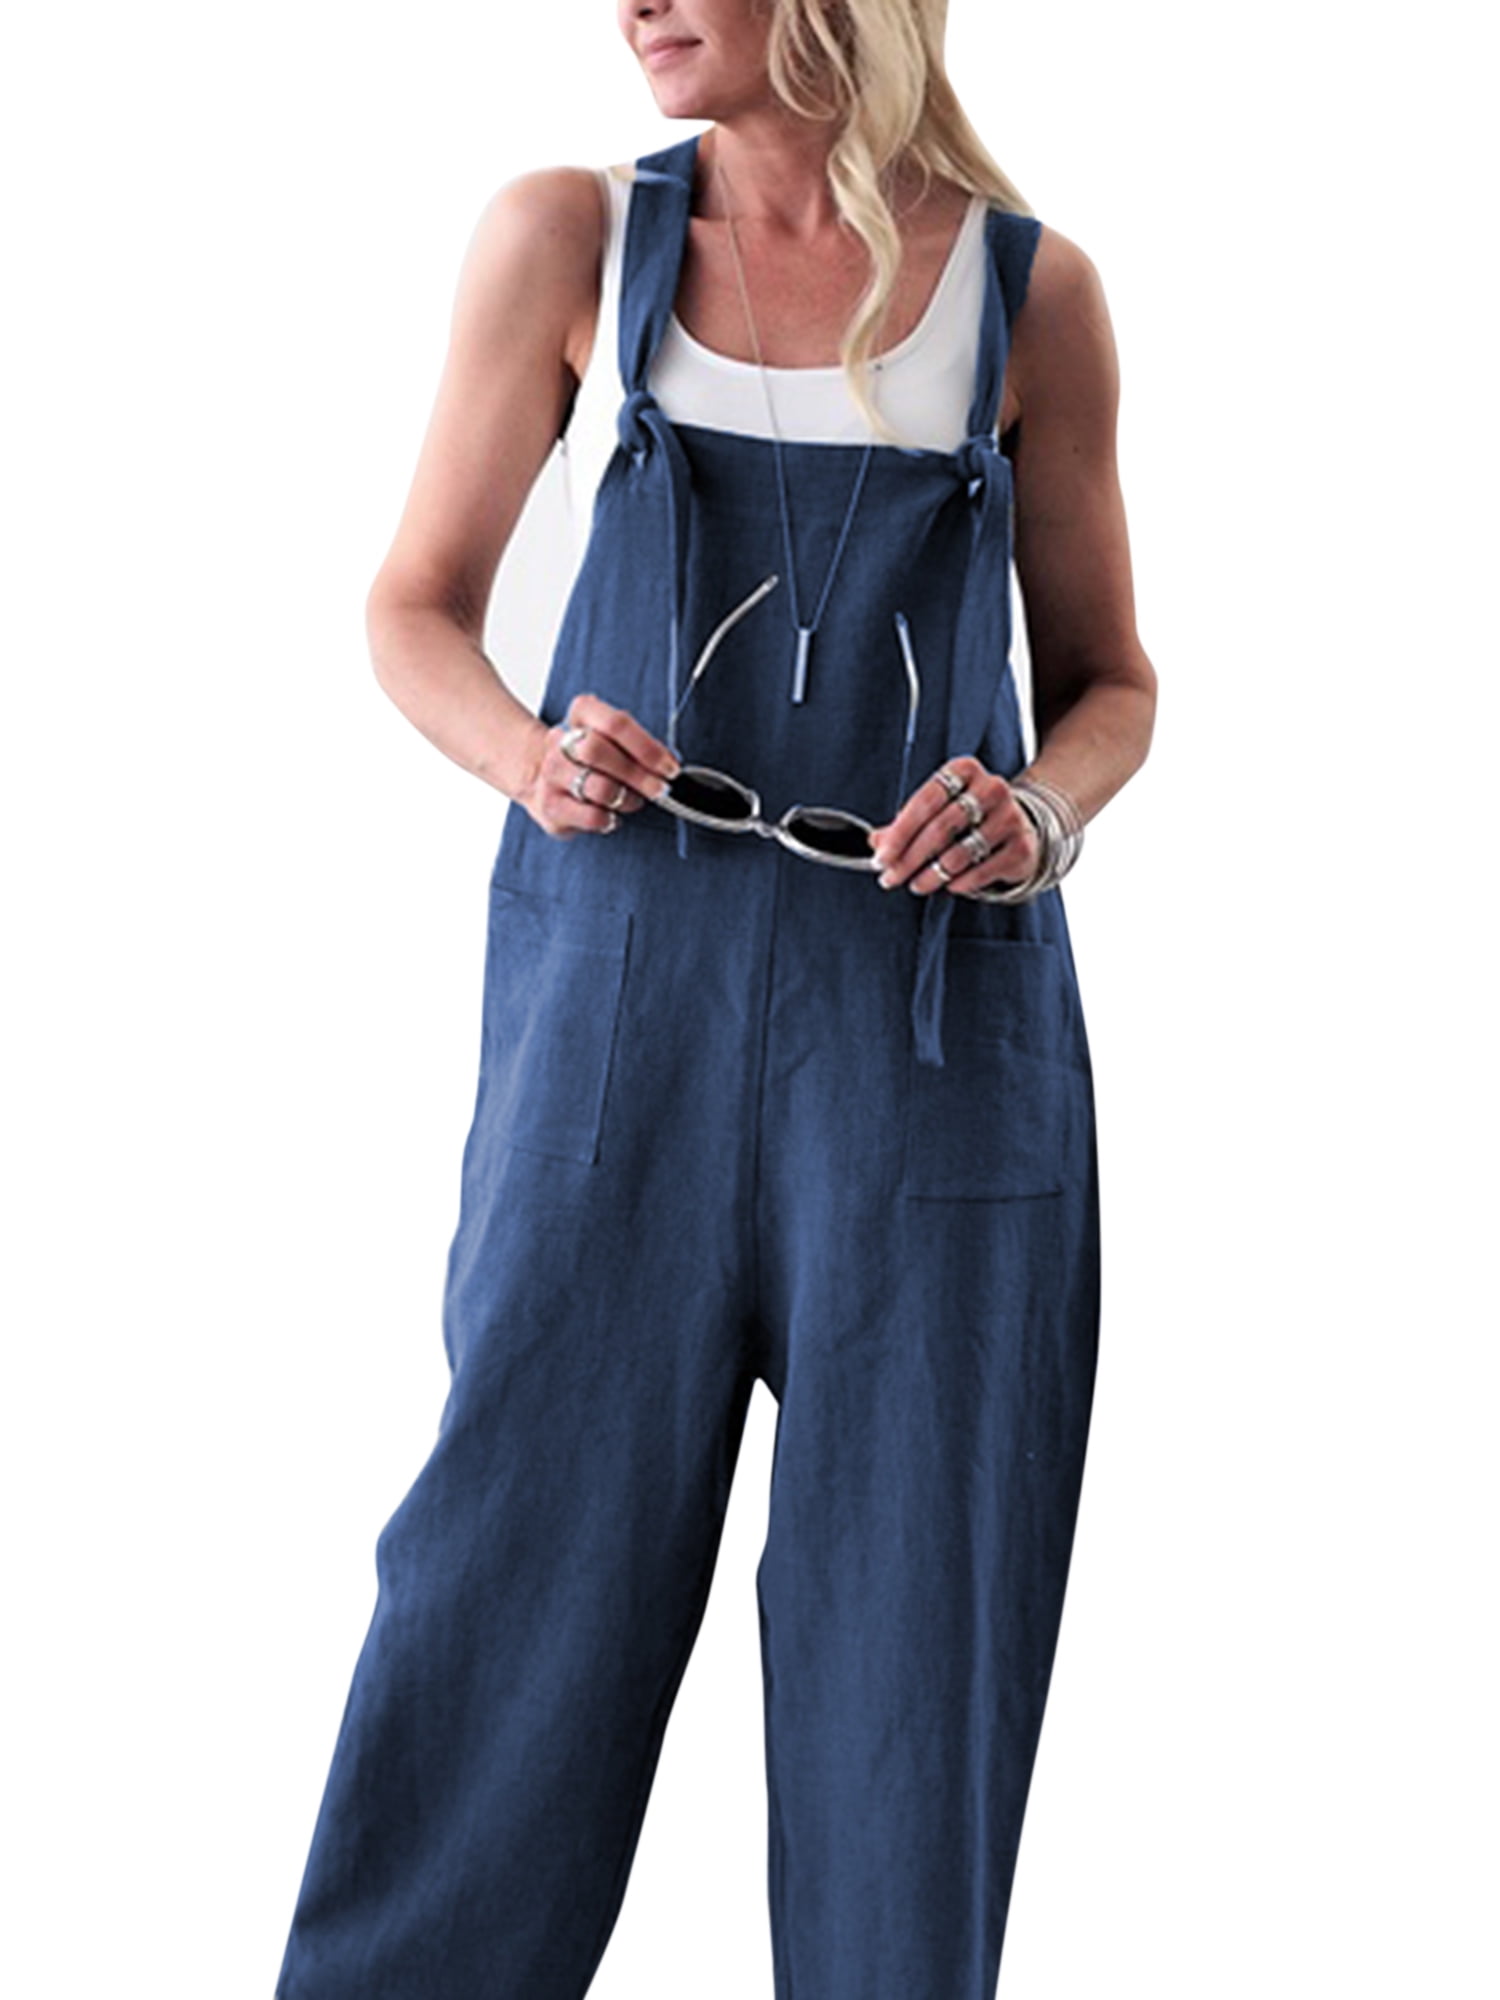 Women Straps Jumpsuits Overalls Shorts Pants Romper Outfits Trousers Playsuits Jumpers Suit Adult Vintage